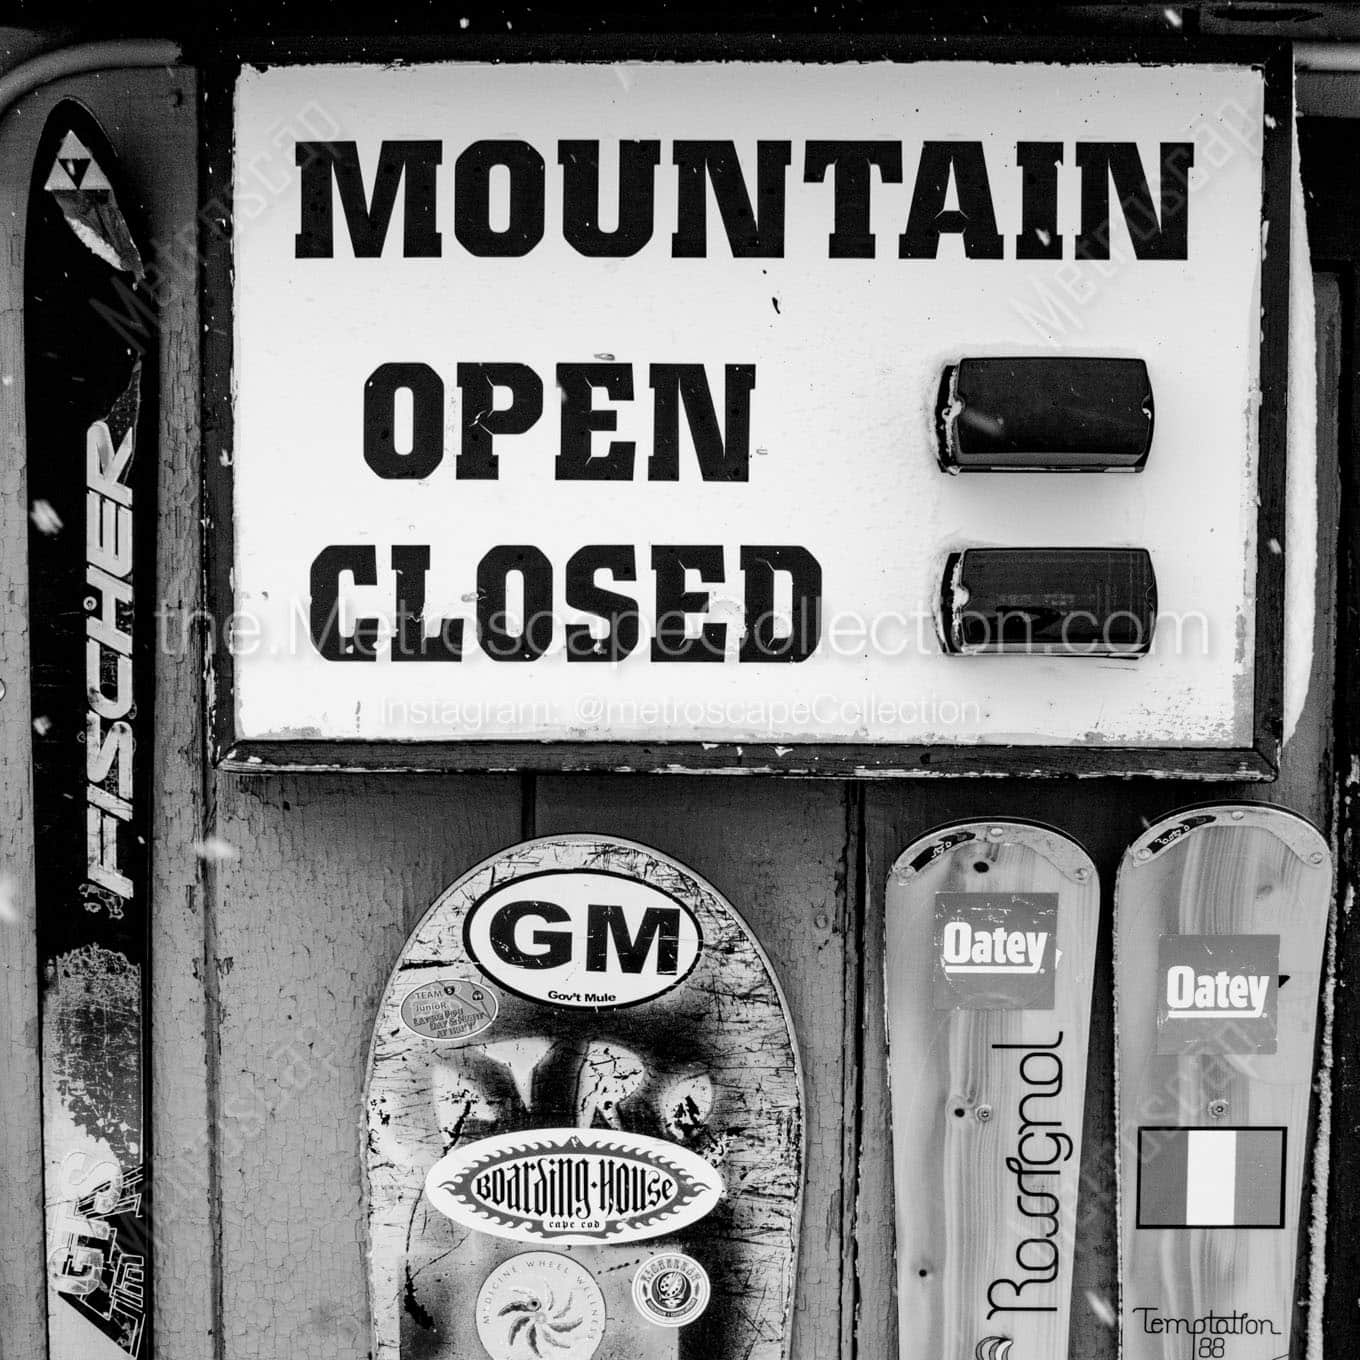 rendezvous mountain open closed sign Black & White Wall Art